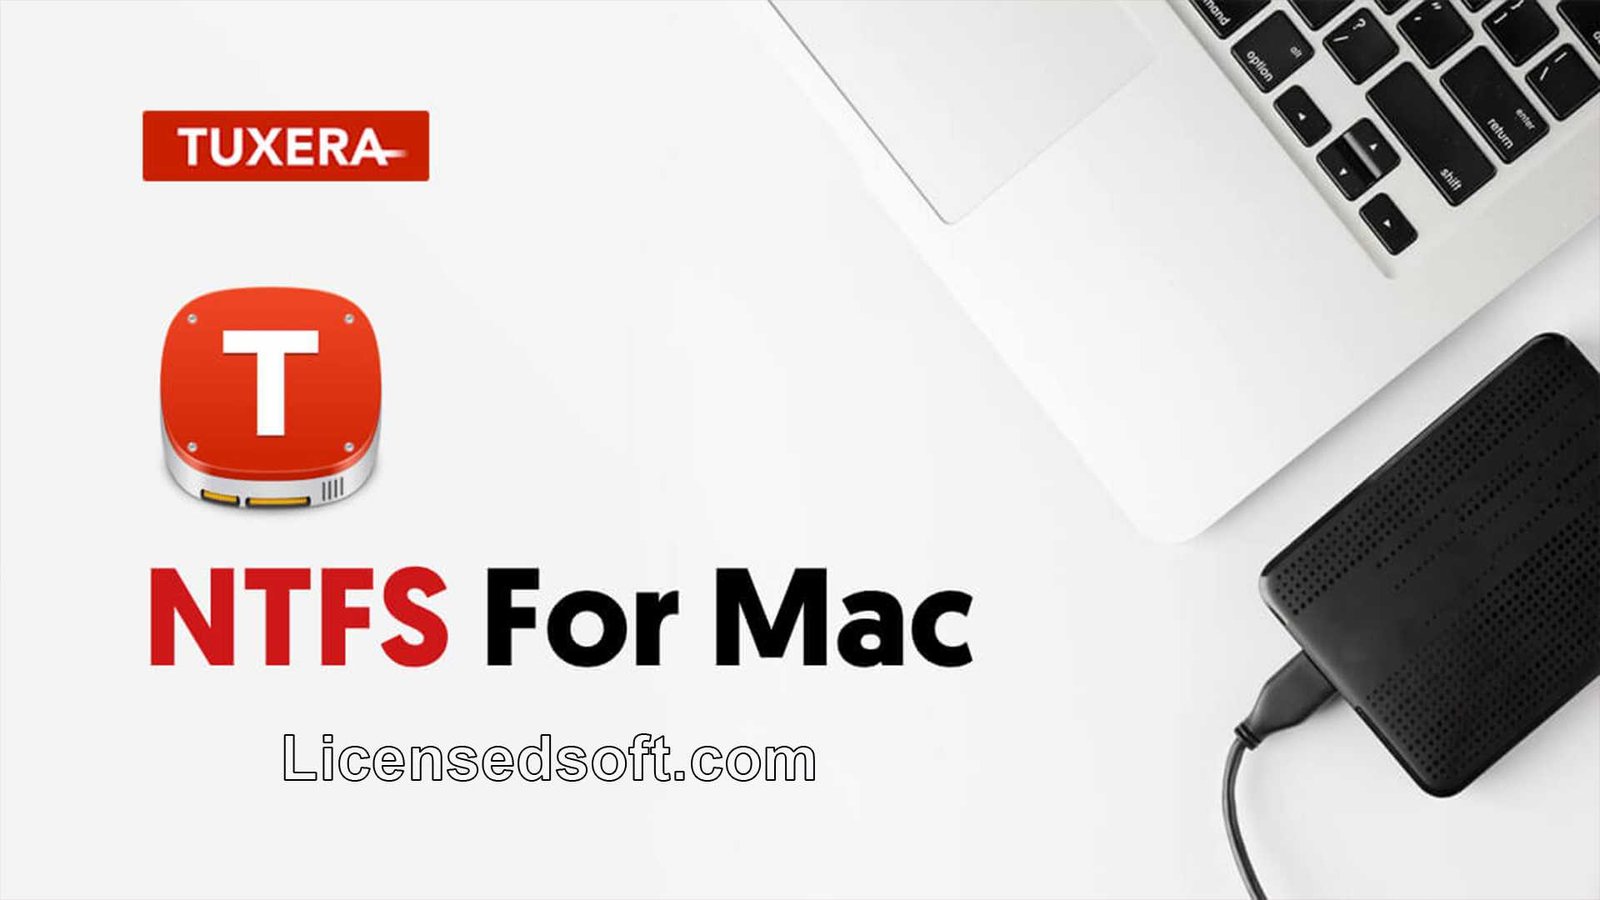 Tuxera NTFS for macOS Lifetime Premium cover Photo by licensedsoft